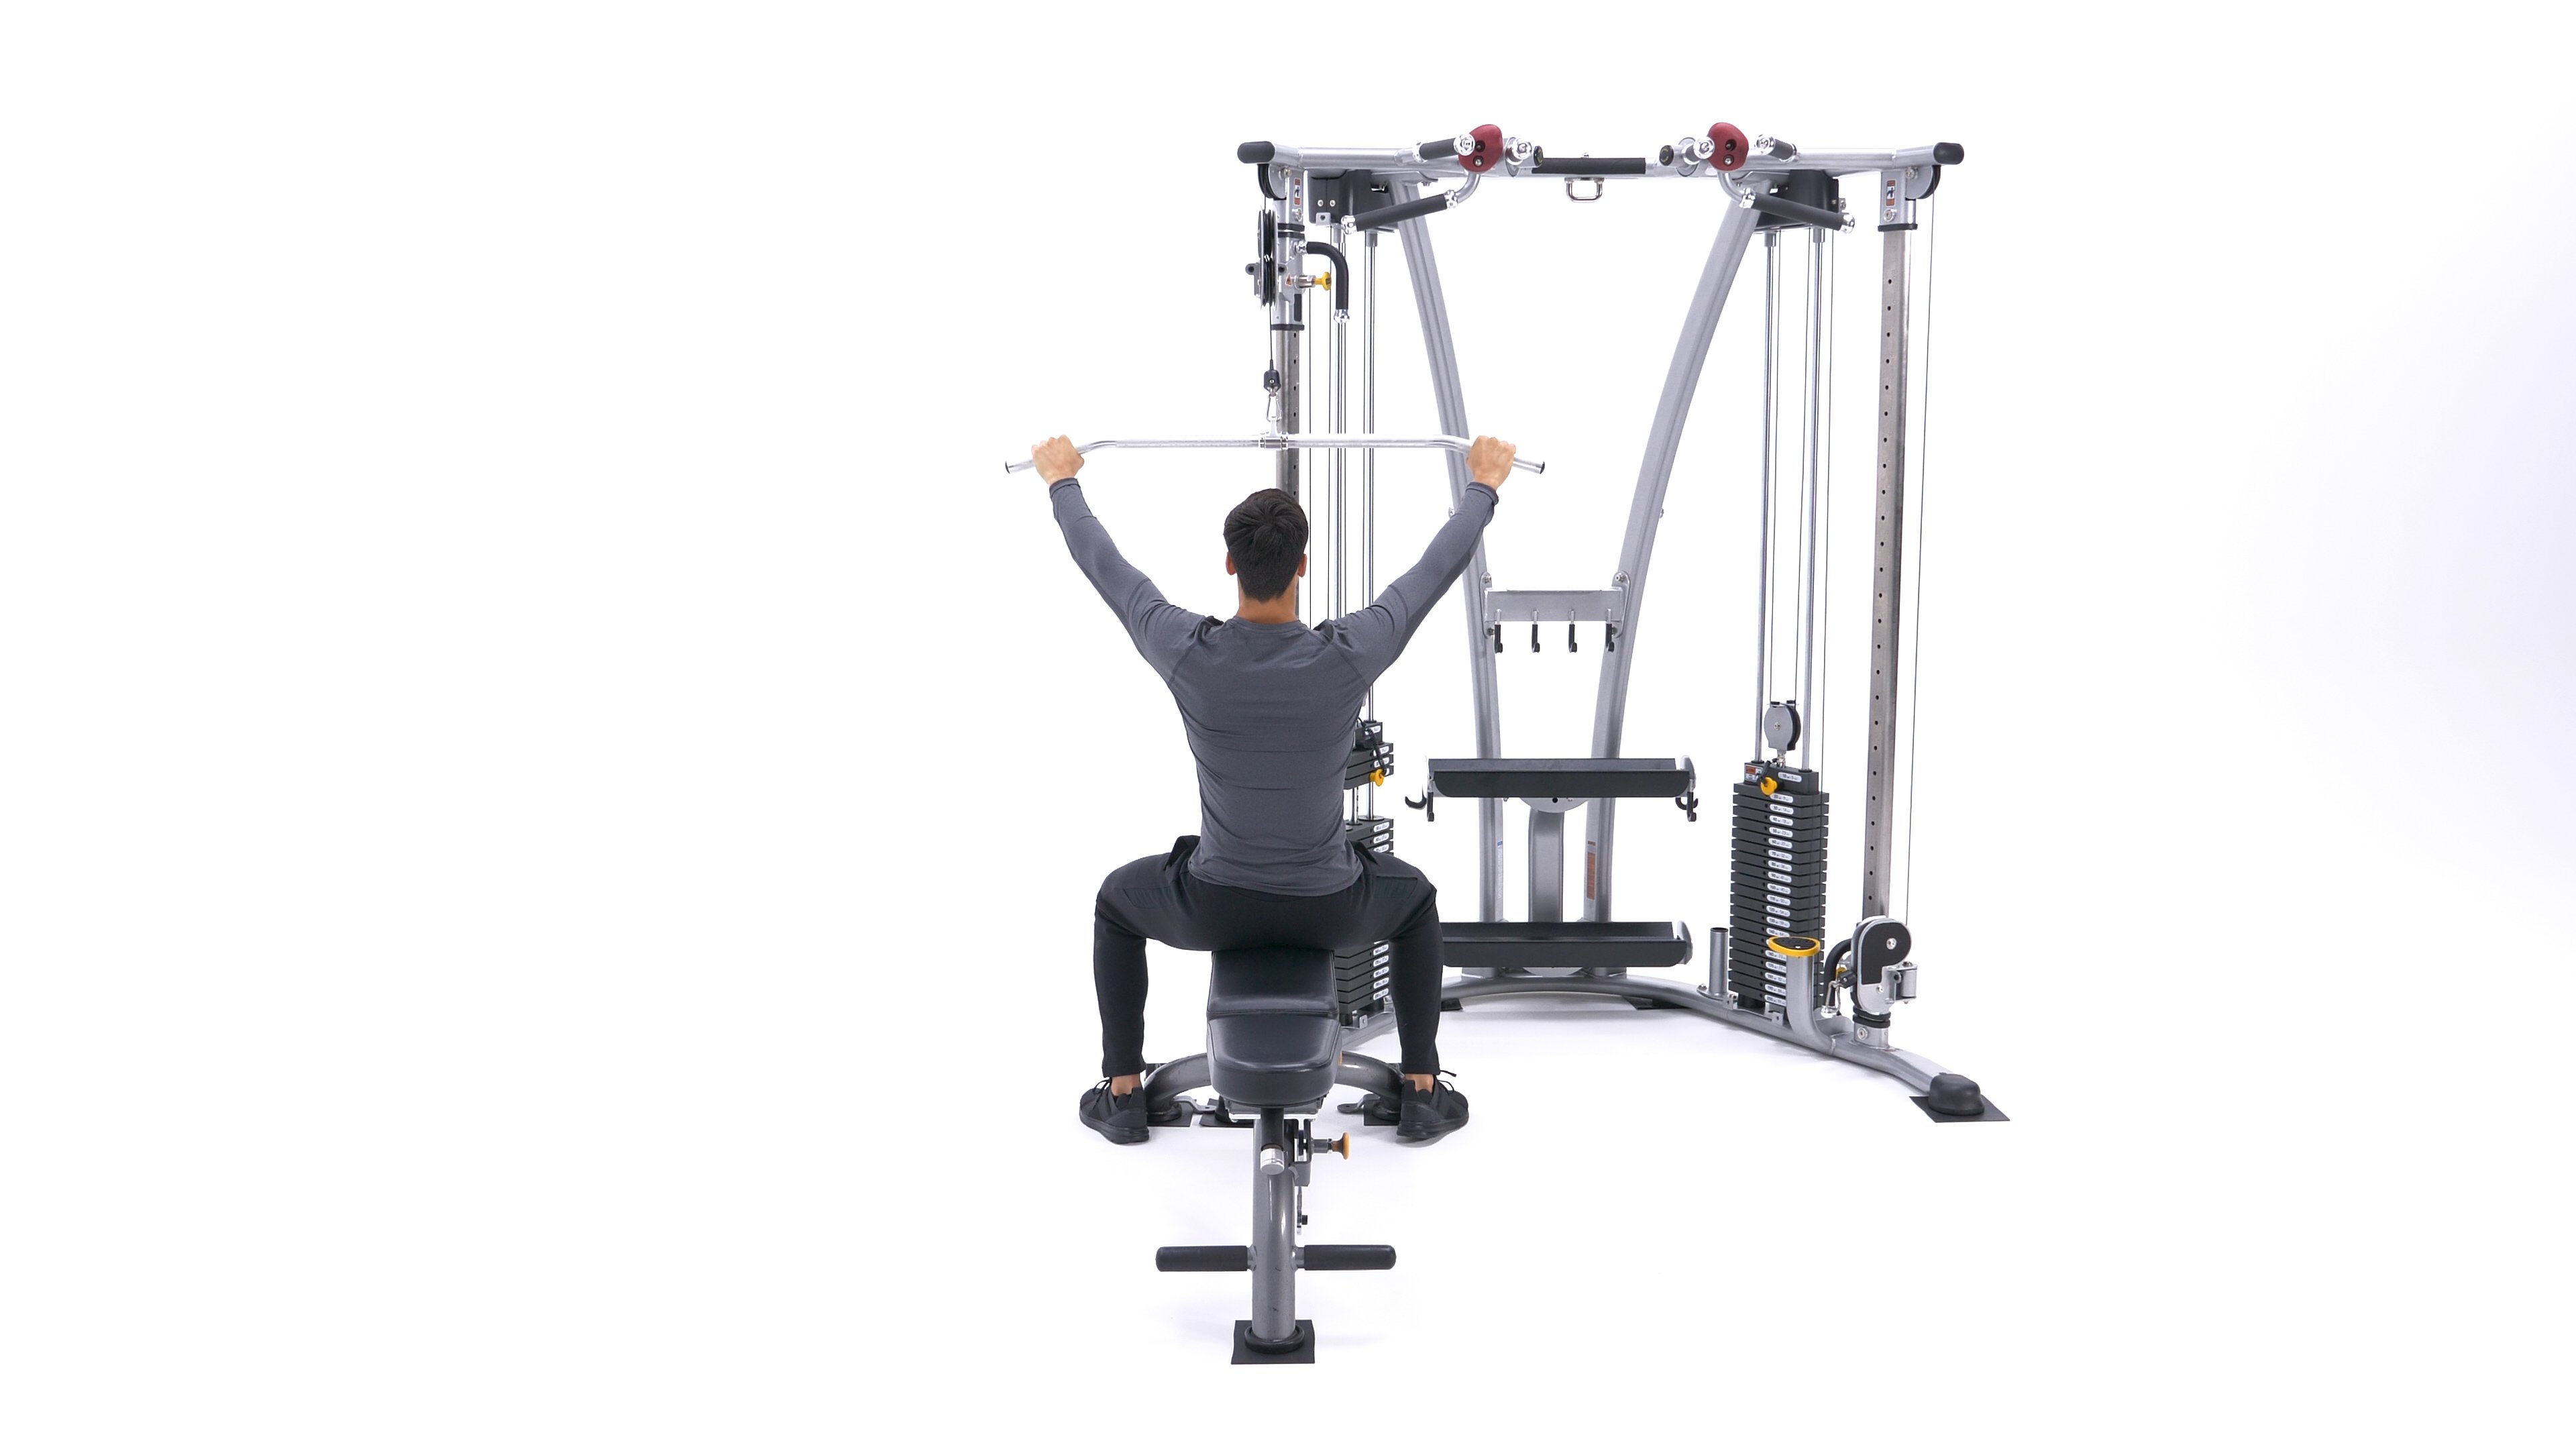 Lat pull-down, Exercise Videos & Guides